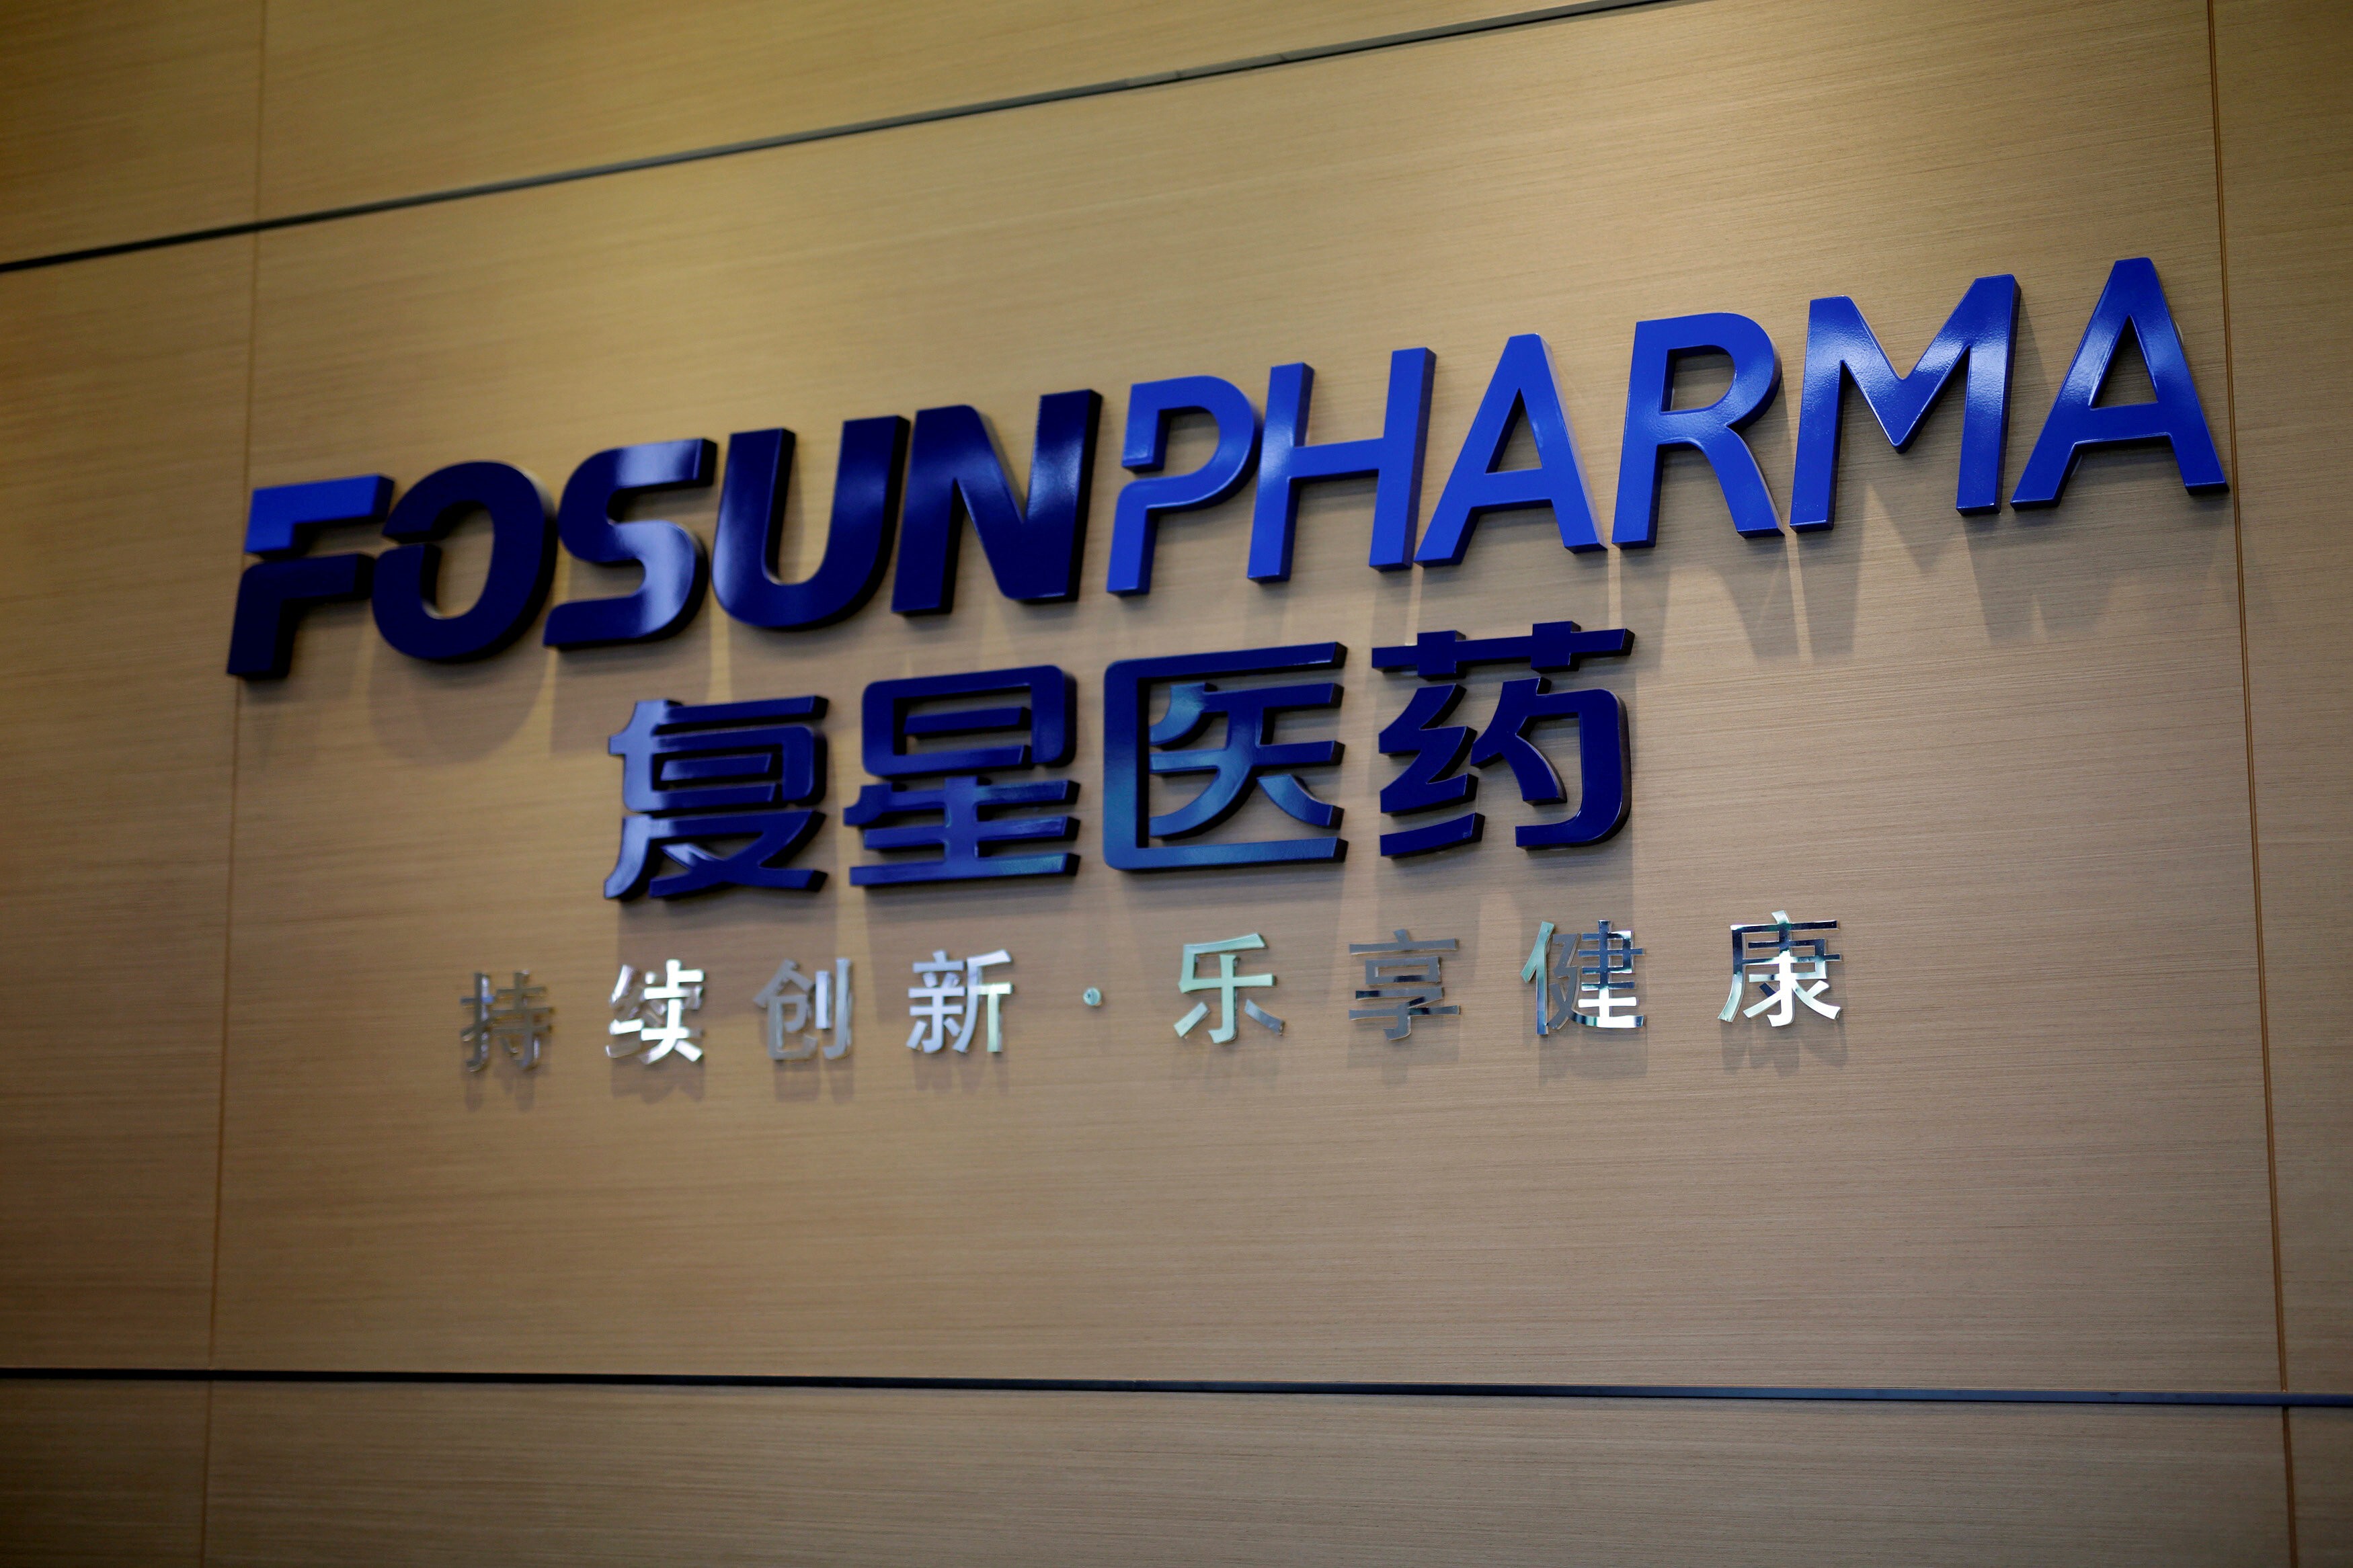 Fosun Pharma and its partner BioNTech are conducting a coronavirus vaccine trial in China. Photo: Reuters